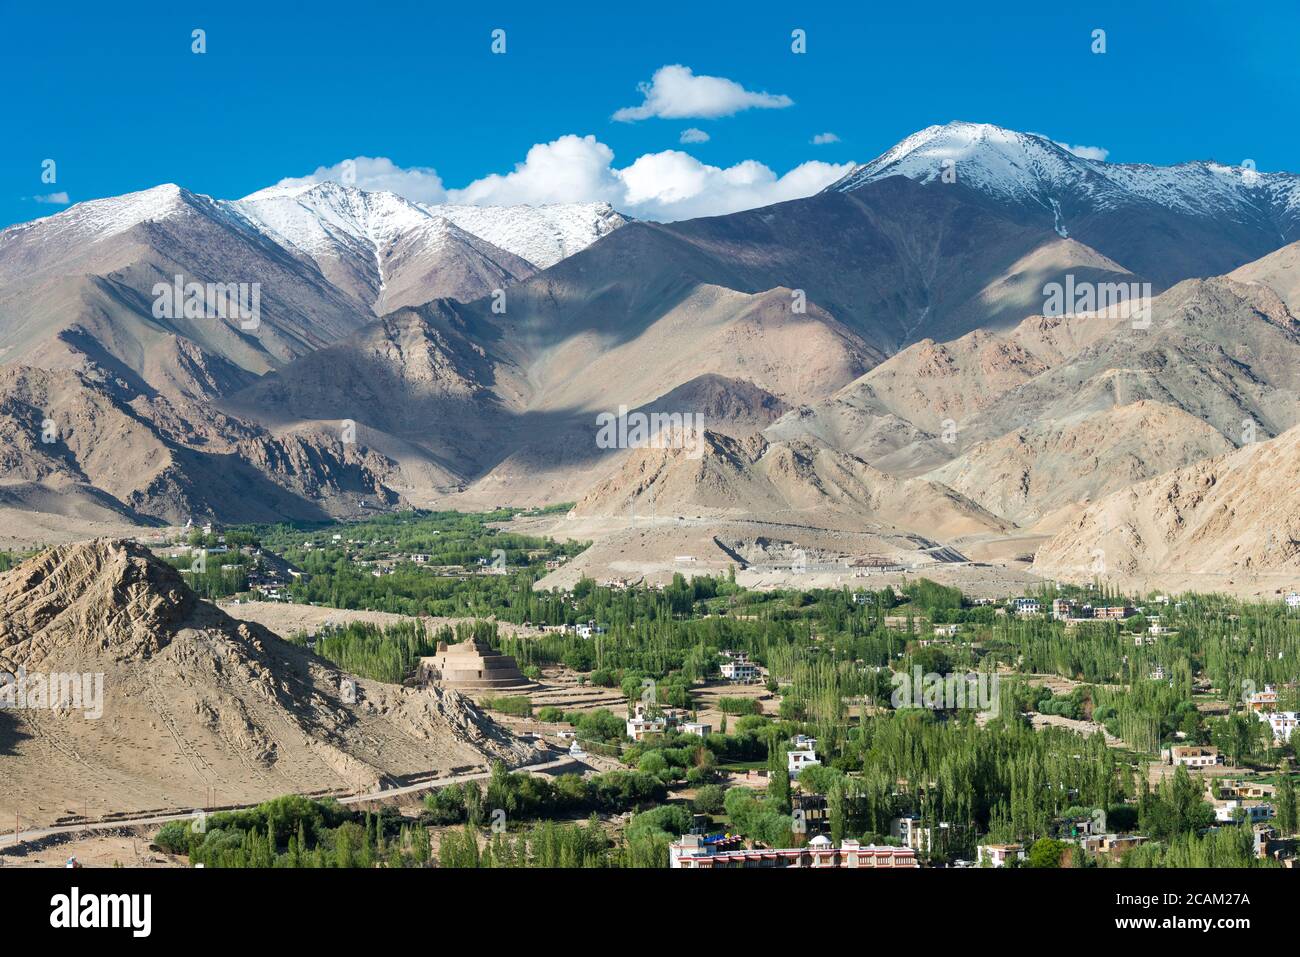 Road To the Mountain with Out of Focus Foreground, Leh, Ladakh, India Stock Photo - Image of manali, europe: 227350504